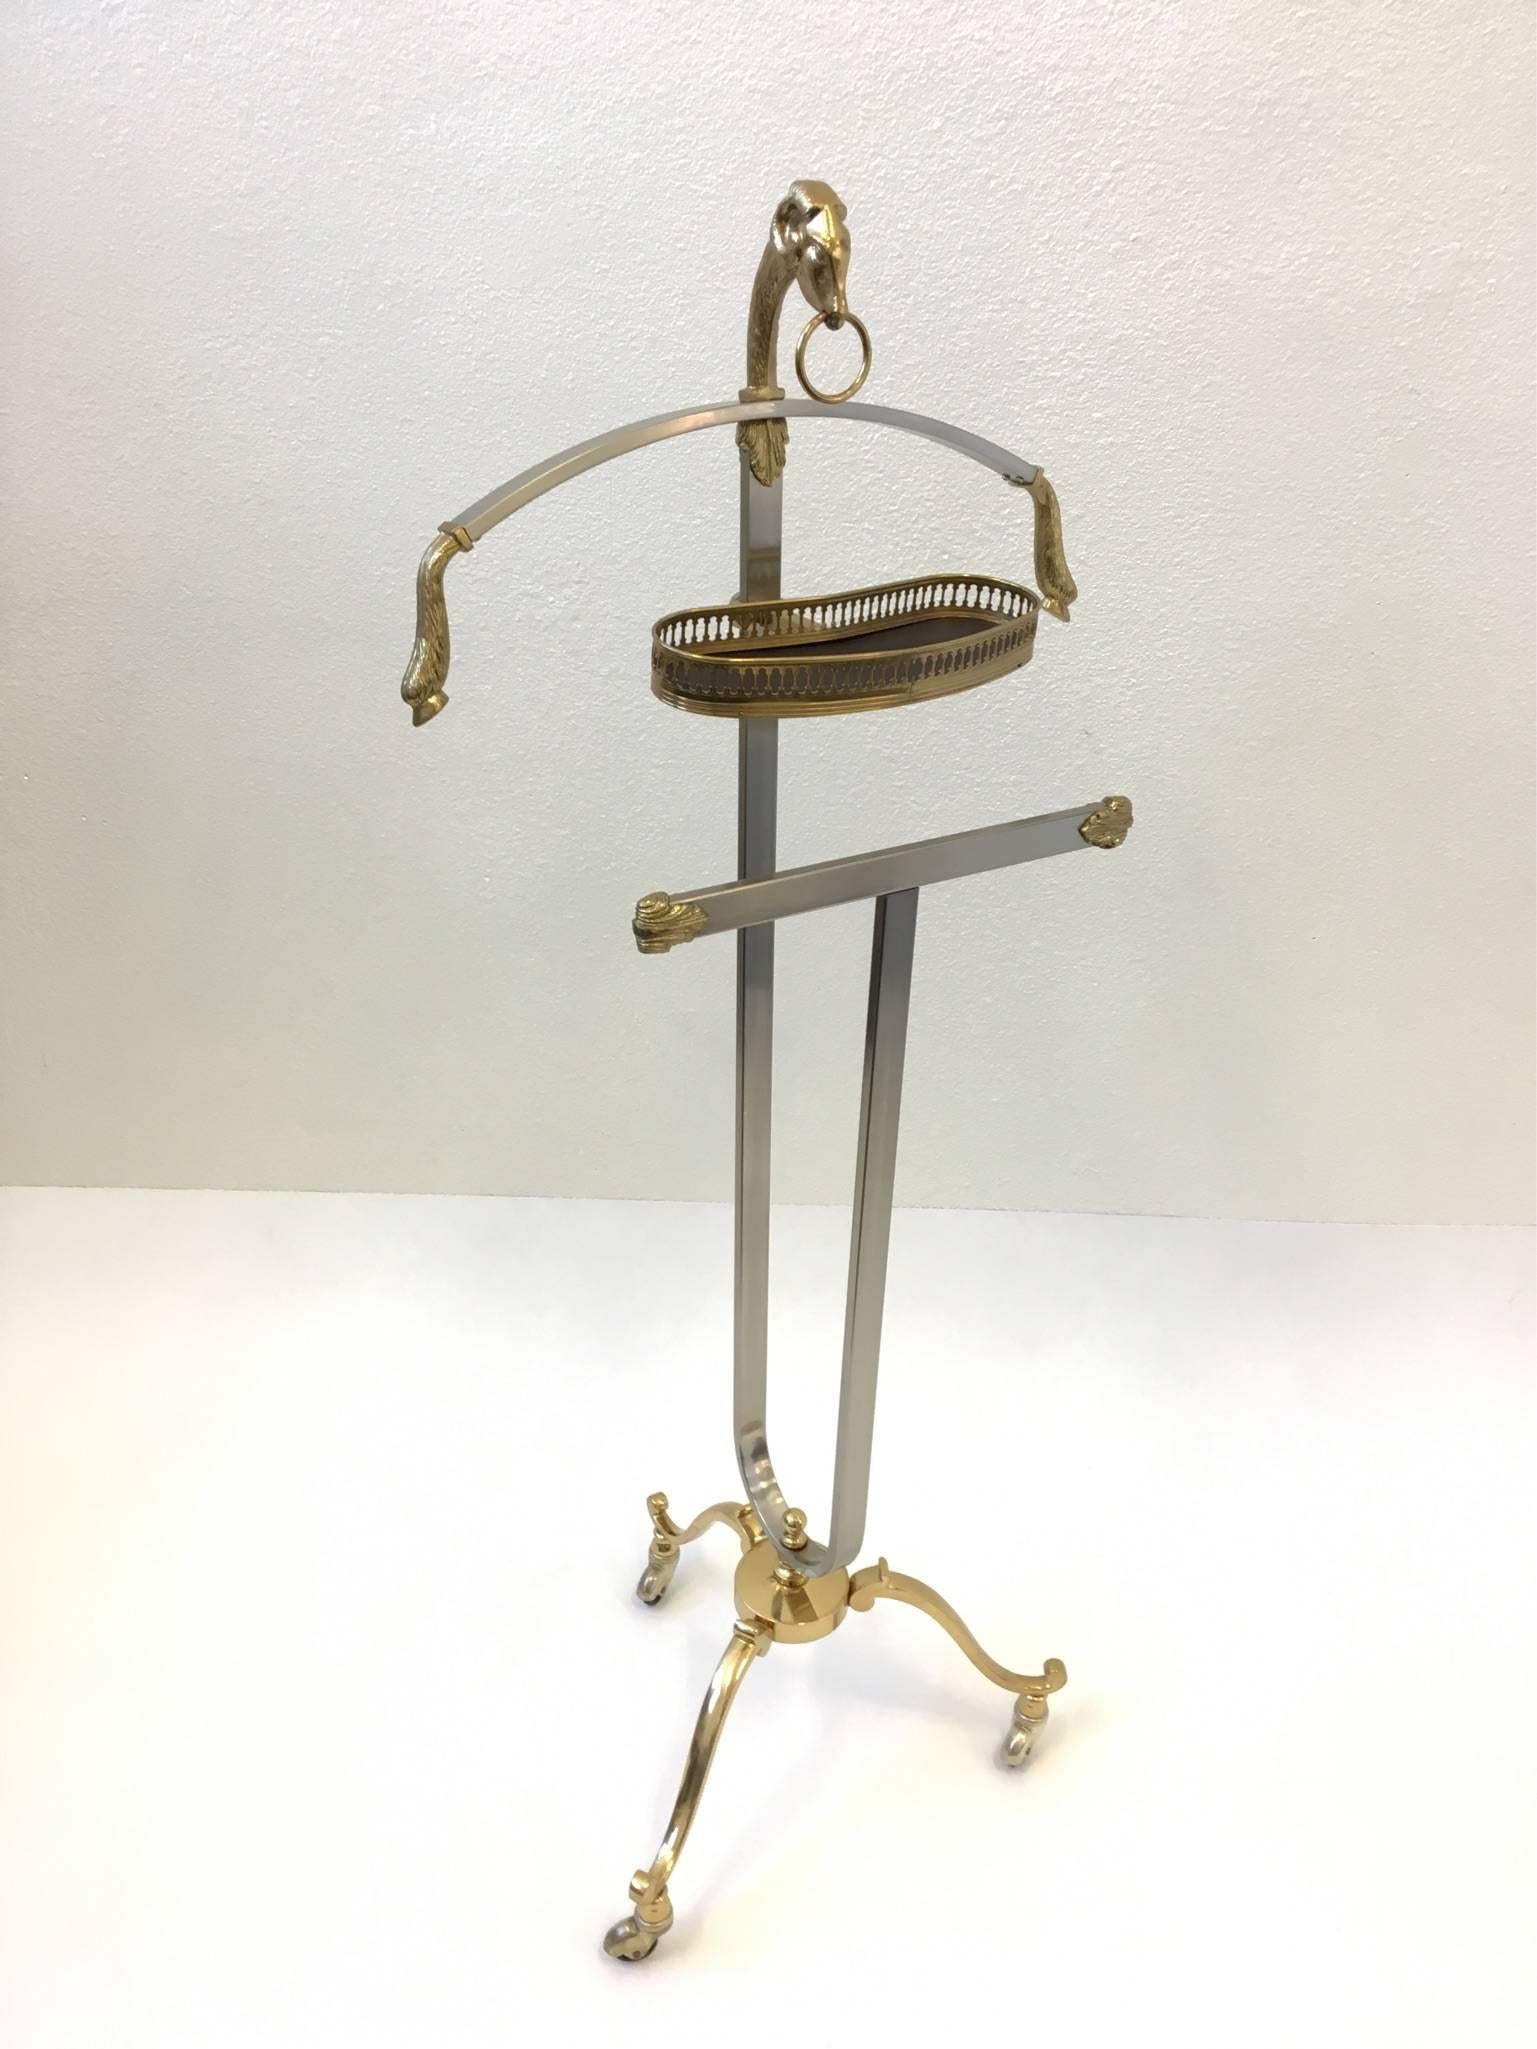 A glamorous masculant Italian valet designed in the 1970s.
Constructed of polished brass and brushed stainless steel. 
Dimensions: 46